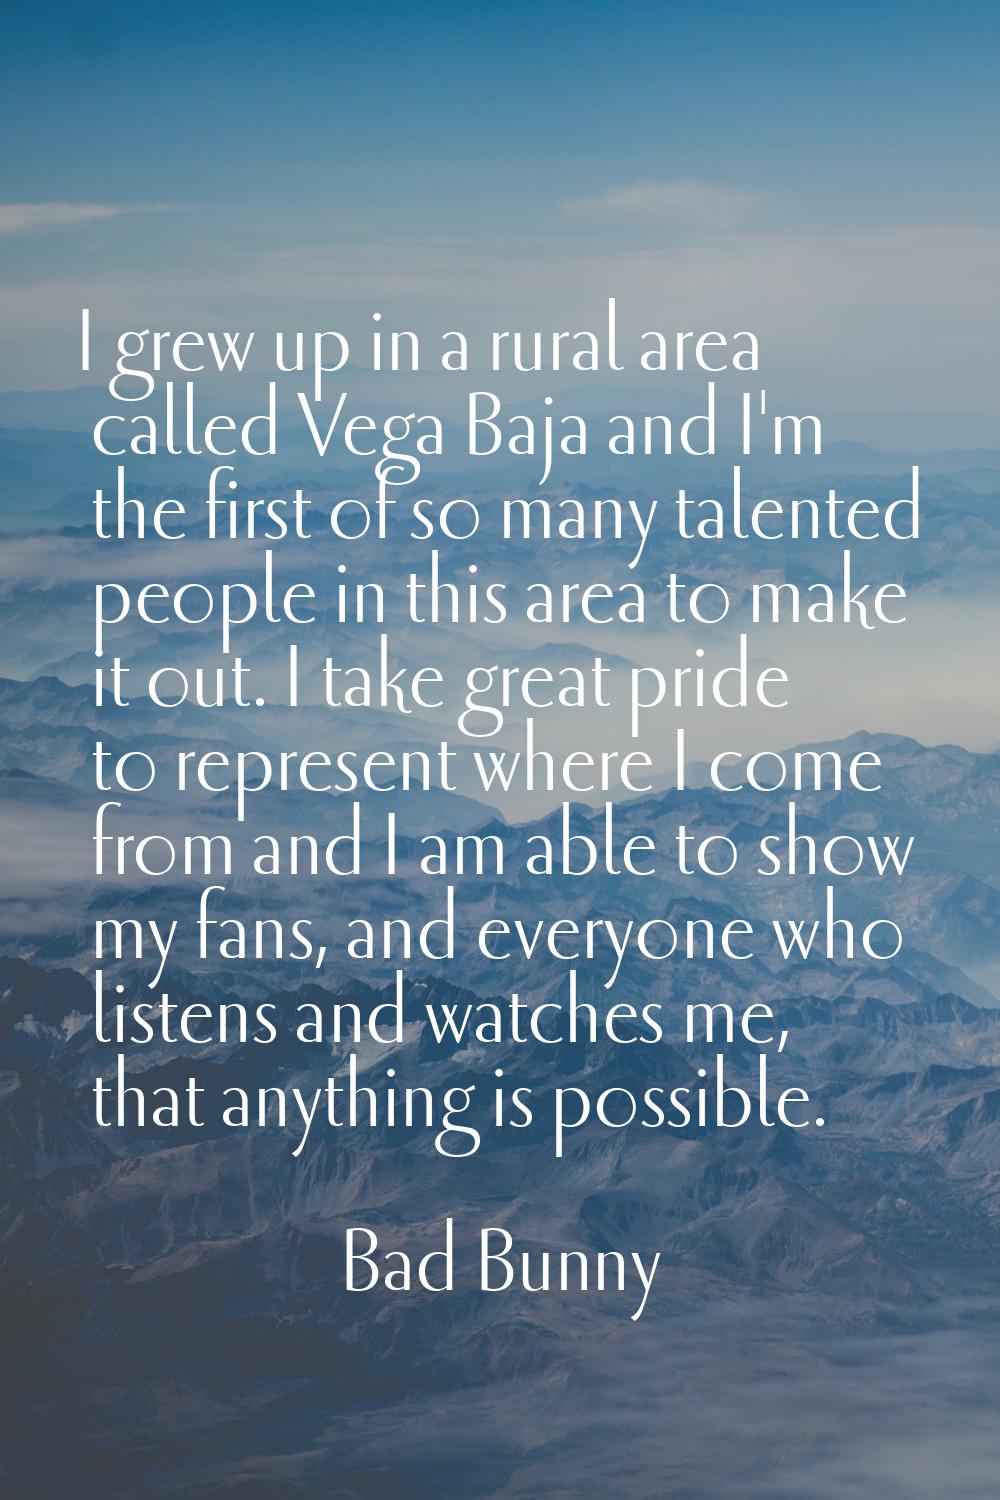 I grew up in a rural area called Vega Baja and I'm the first of so many talented people in this are